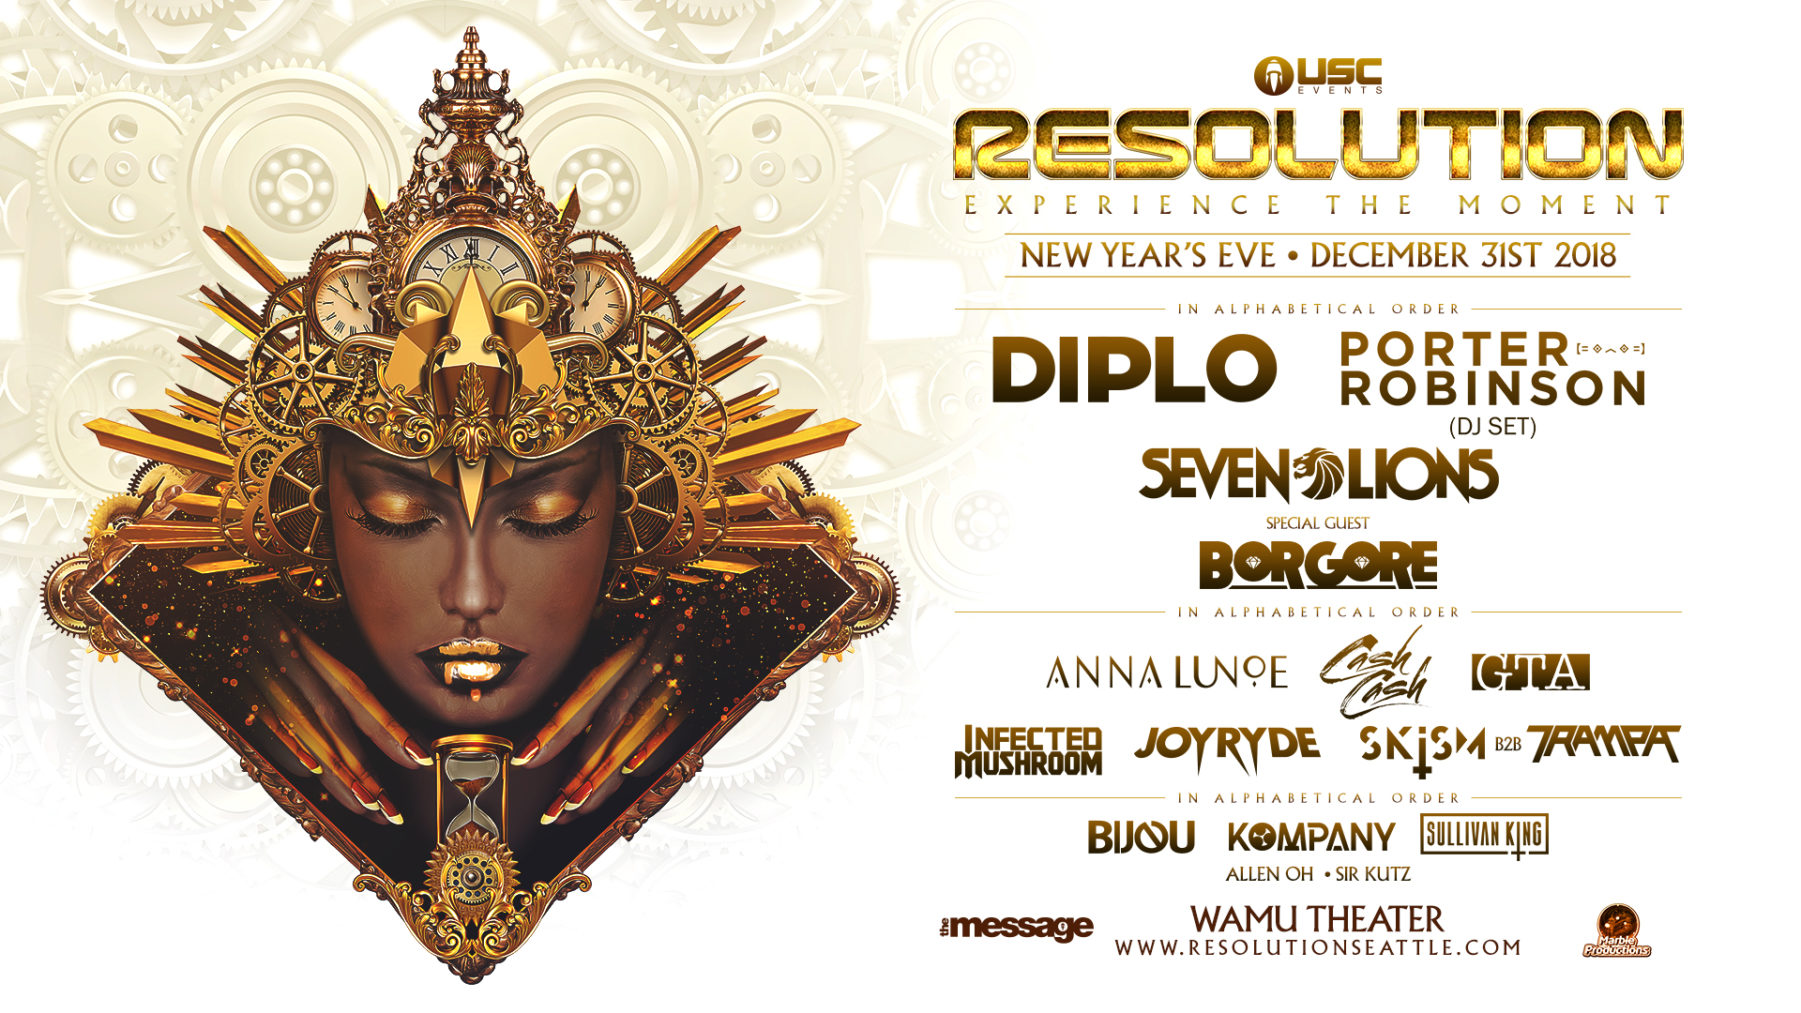 USC Events presents Resolution 2019's full artist lineup